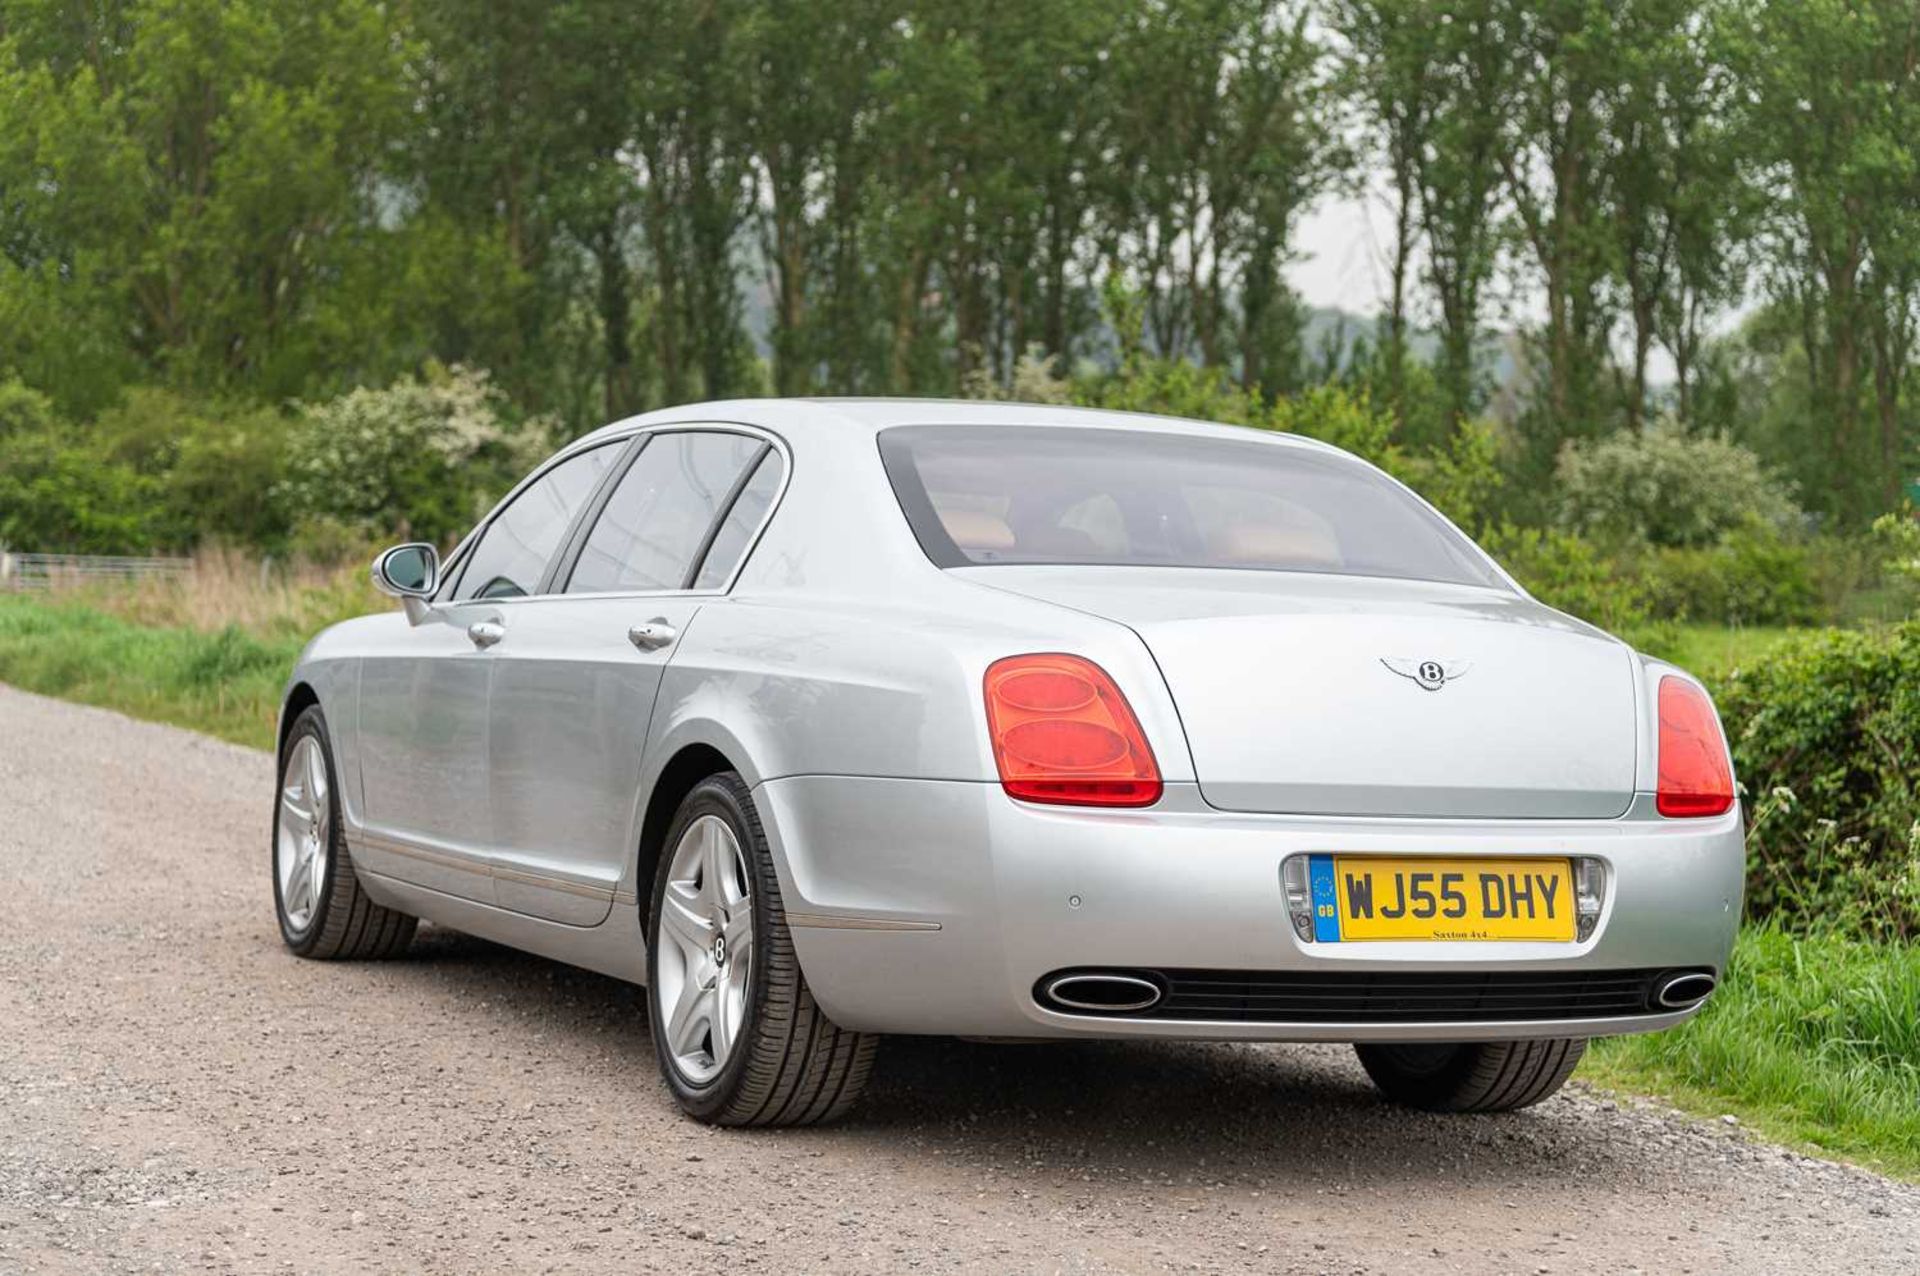 2005 Bentley Continental Flying Spur - Image 9 of 81